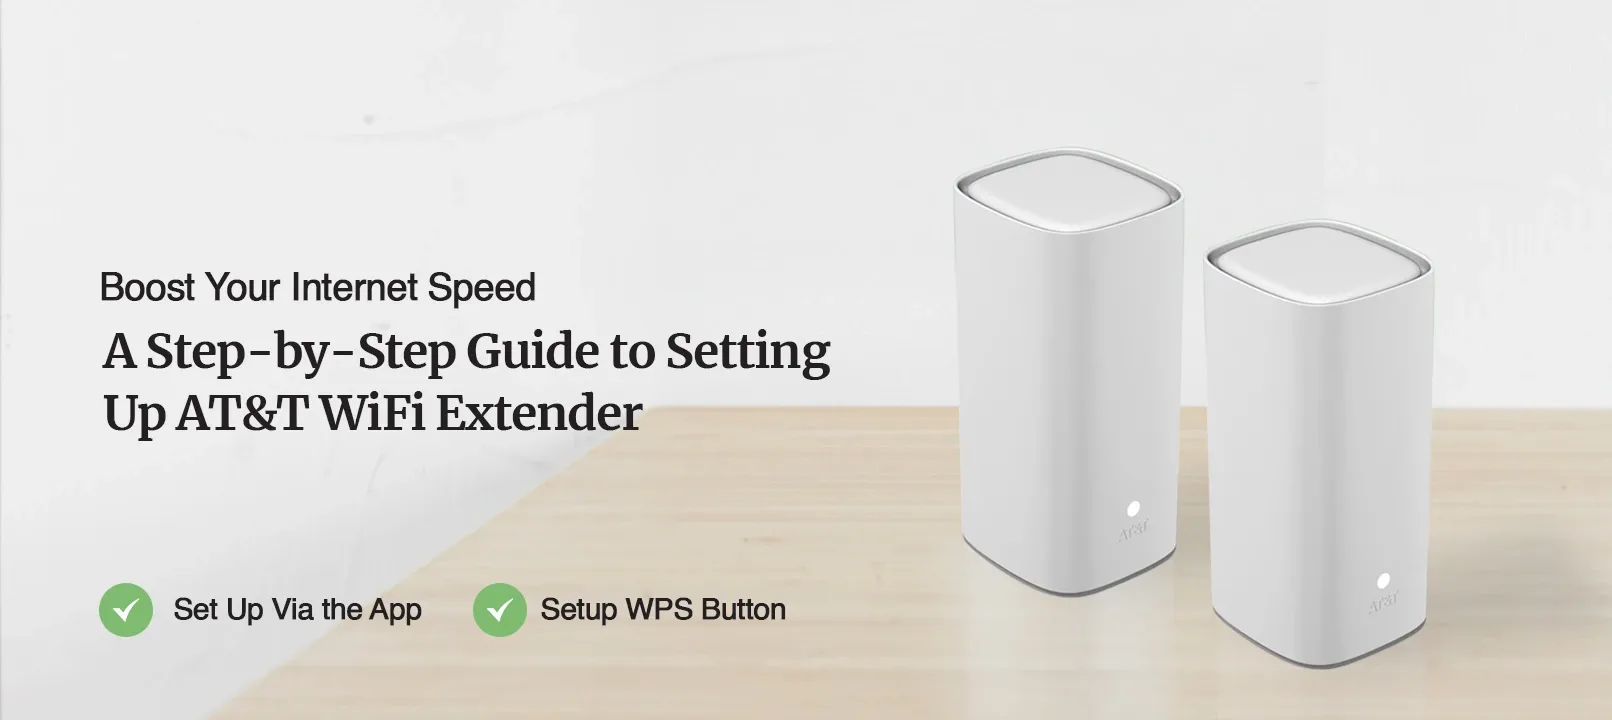 How to Set Up AT&T WiFi Extender